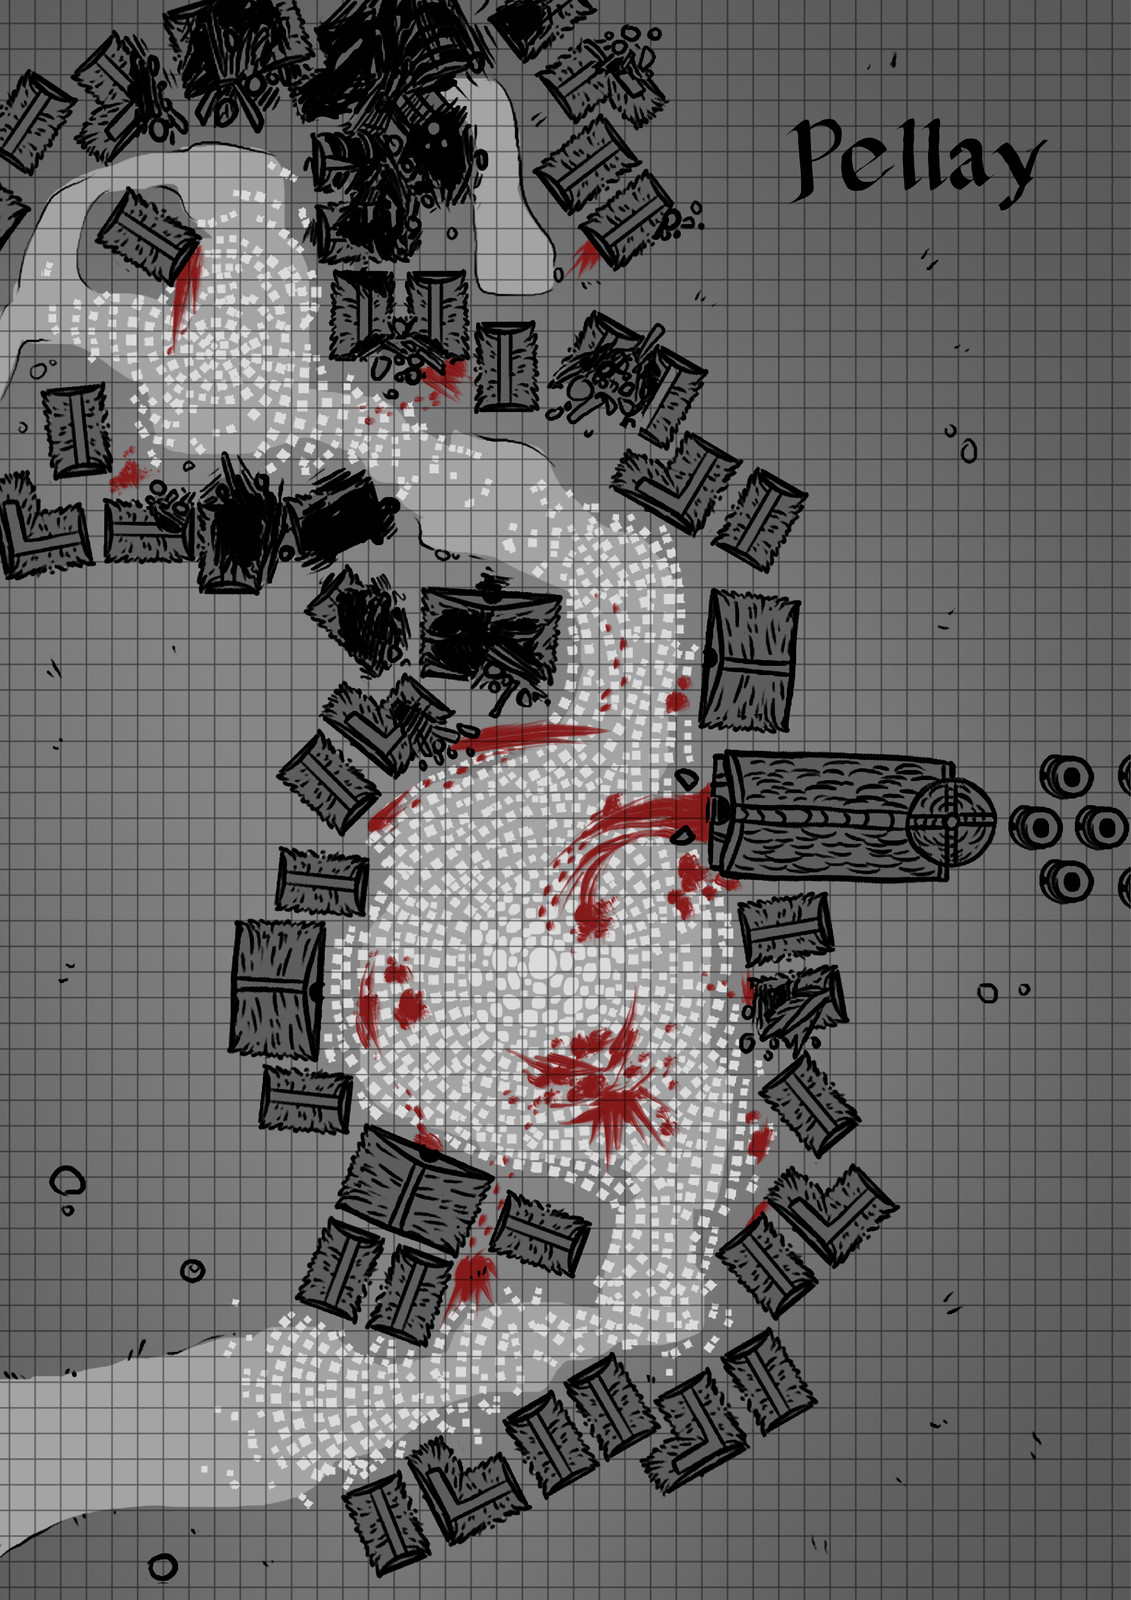 Destroyed Town Pellay map.